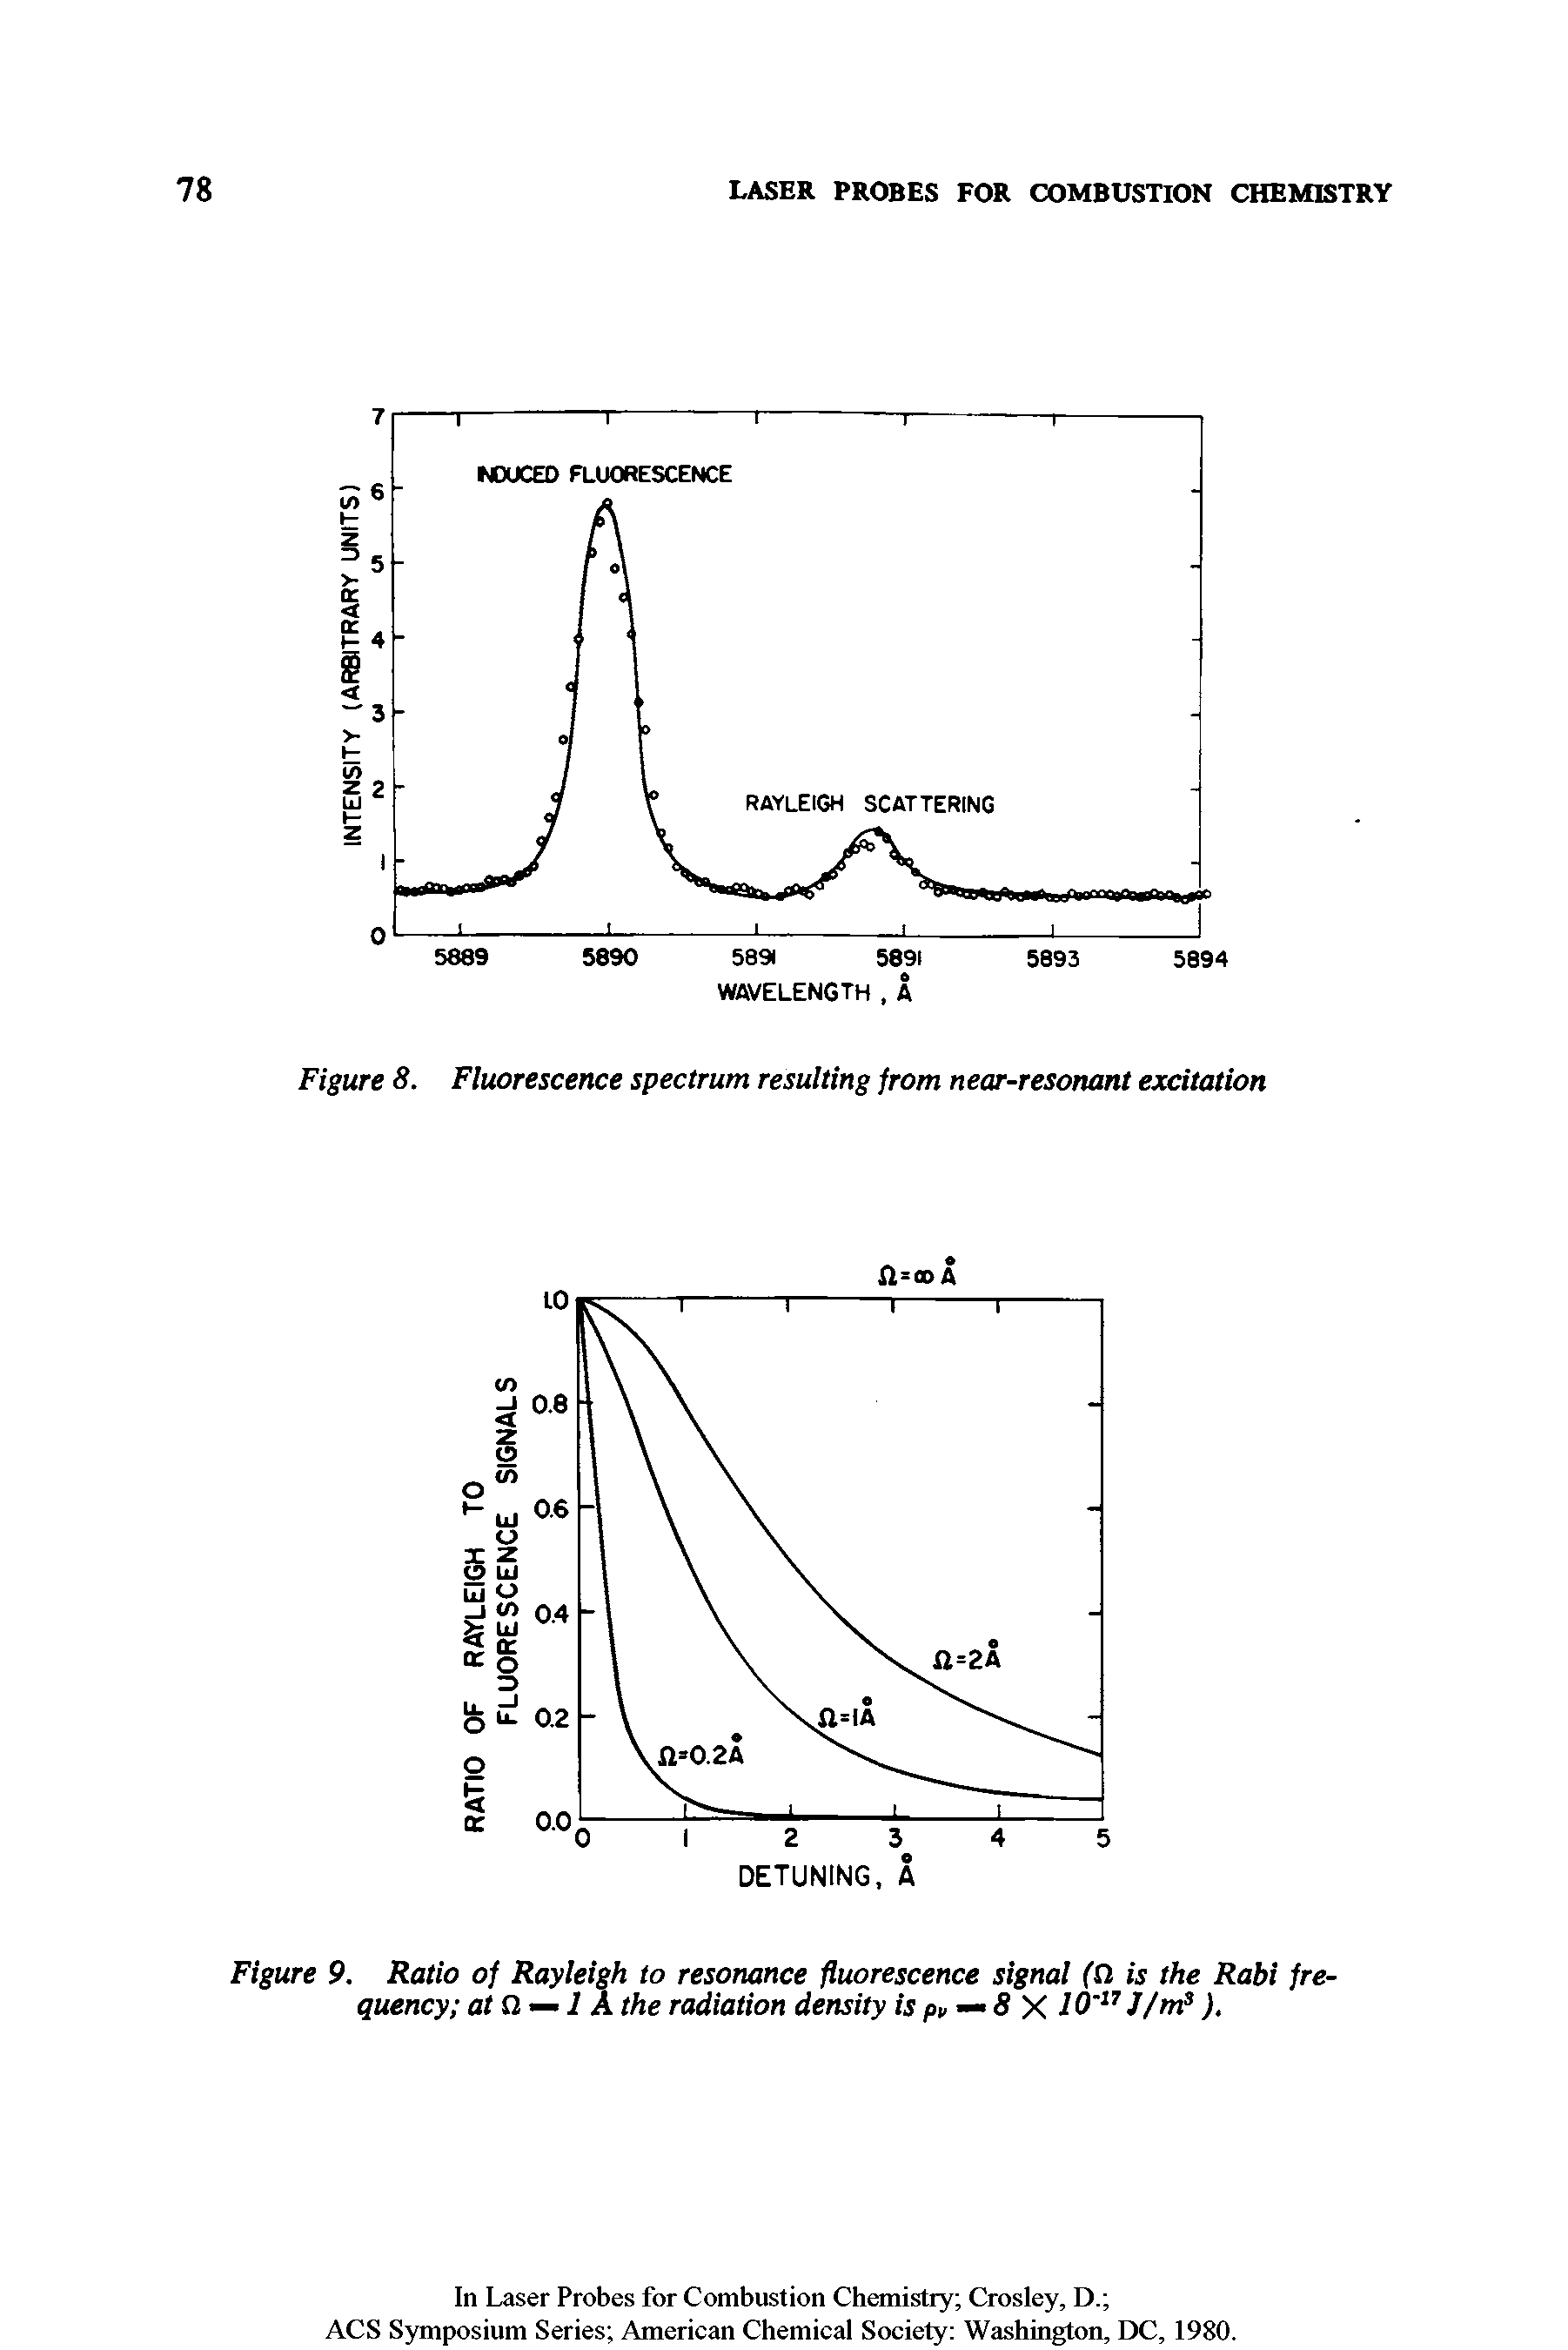 Figure 9. Ratio of Rayleigh to resonance fluorescence signal (Cl is the Rabi frequency at Cl — 1 A the radiation density is — 8 X JO 17 J/m3).